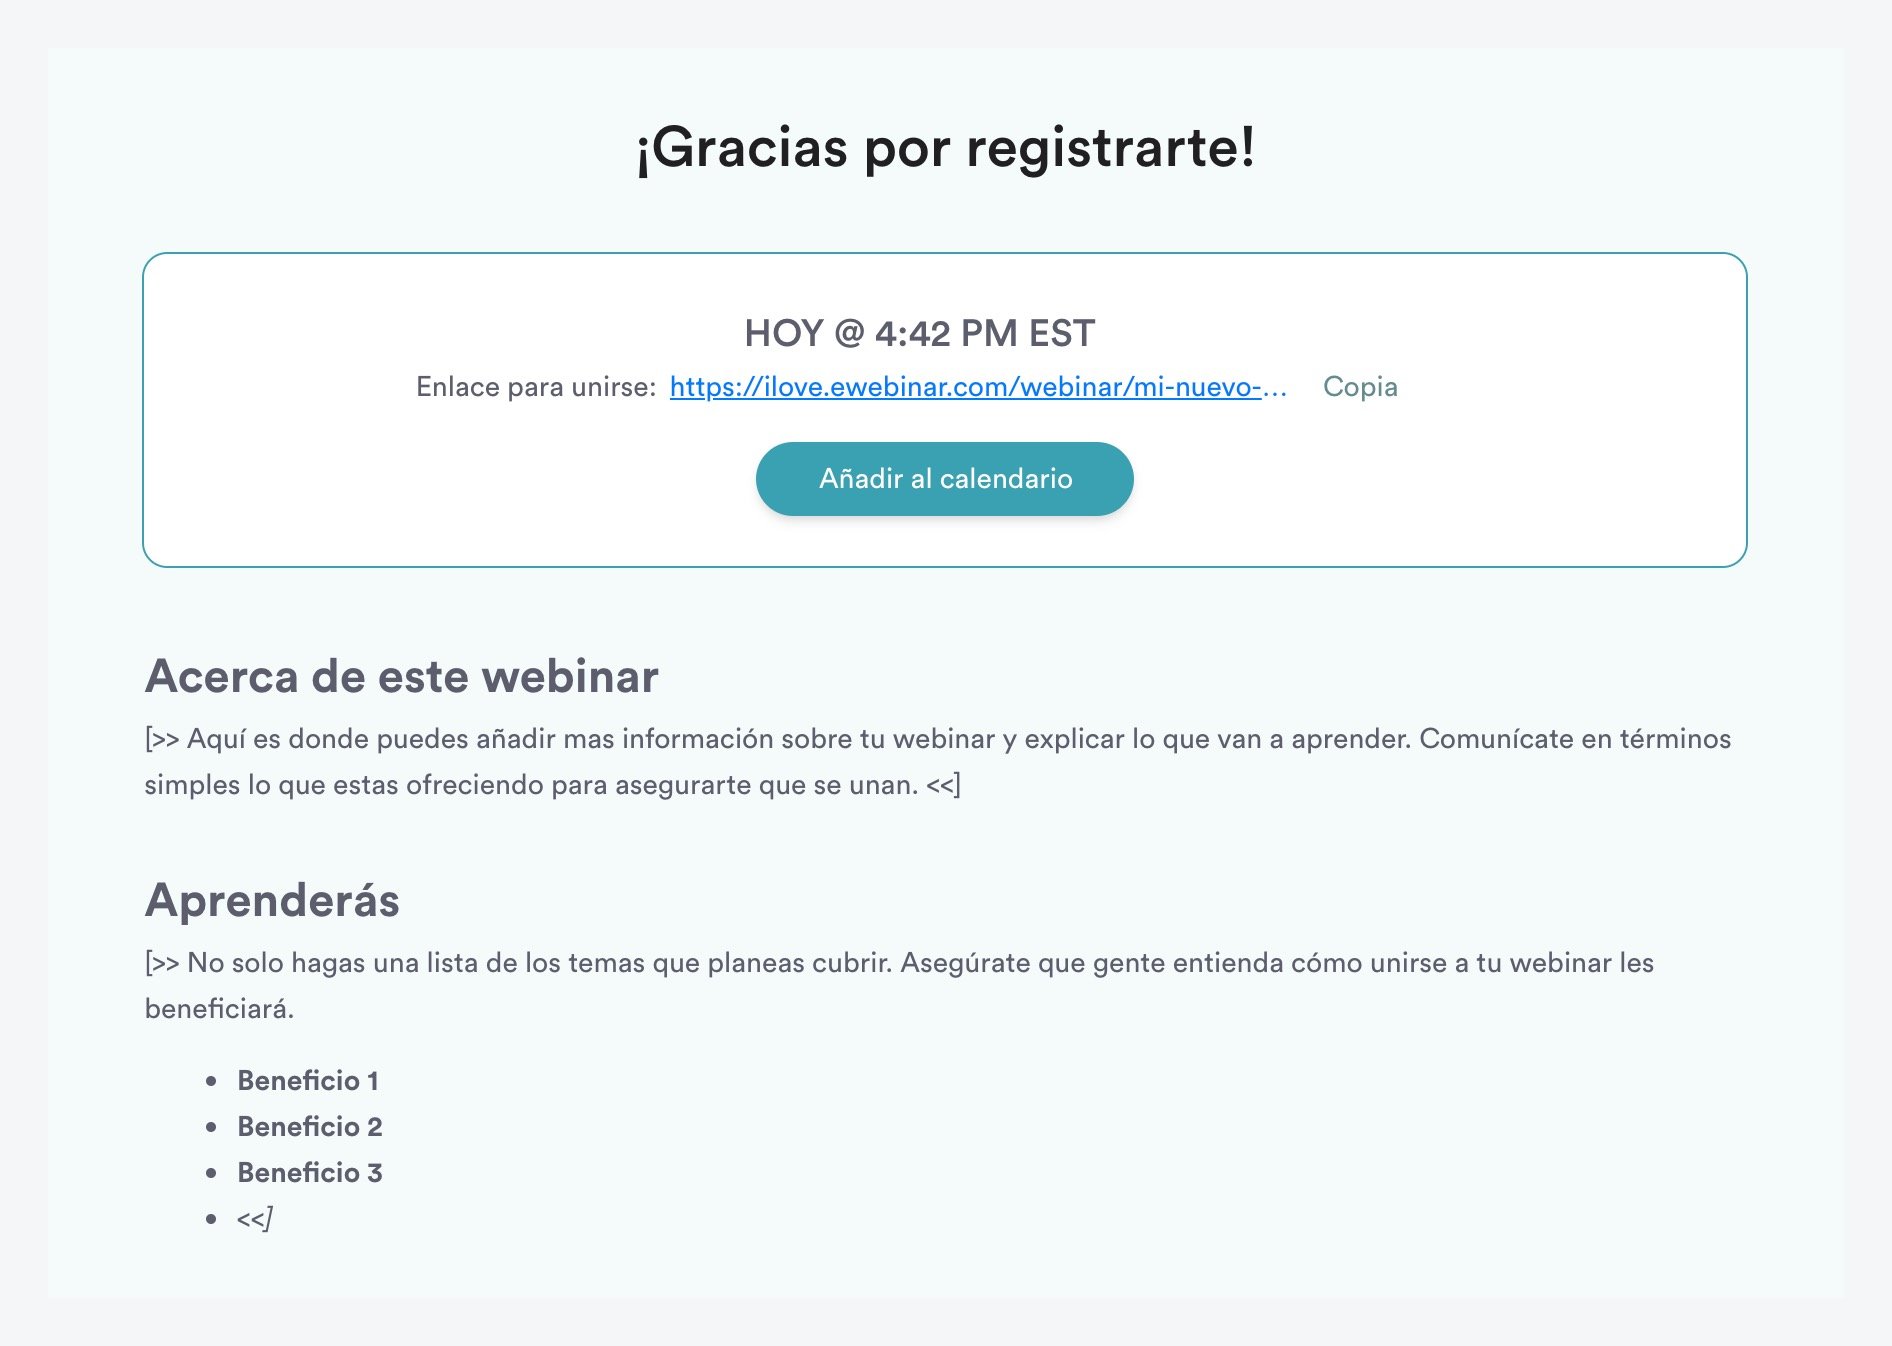 Thank you page in standard eWebinar template in Spanish